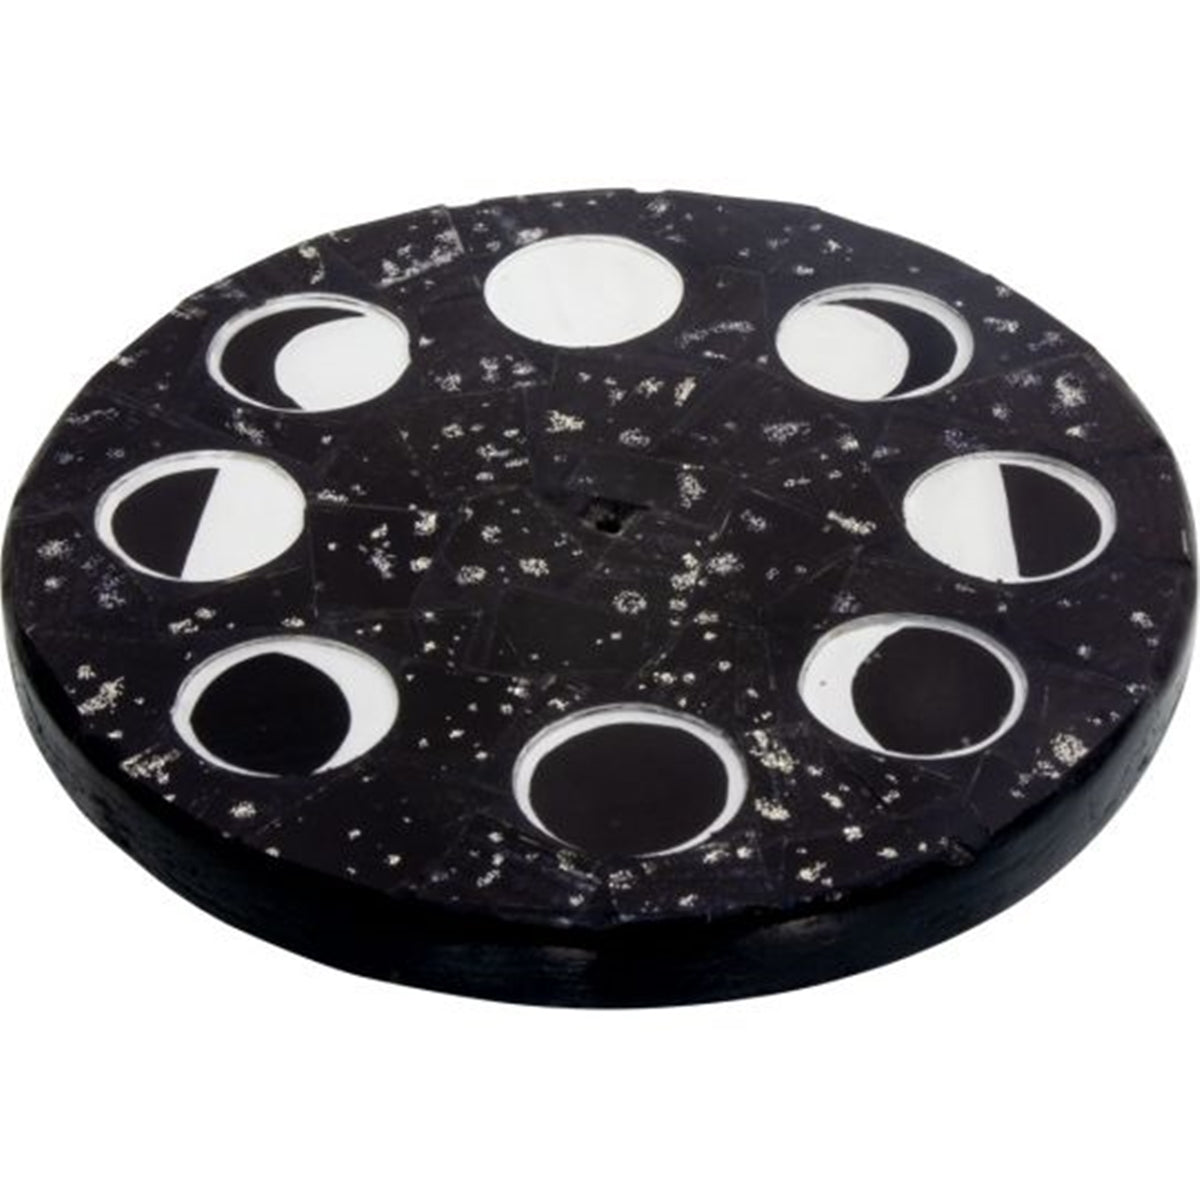 Mosaic Moon Phases Incense Holder-Round